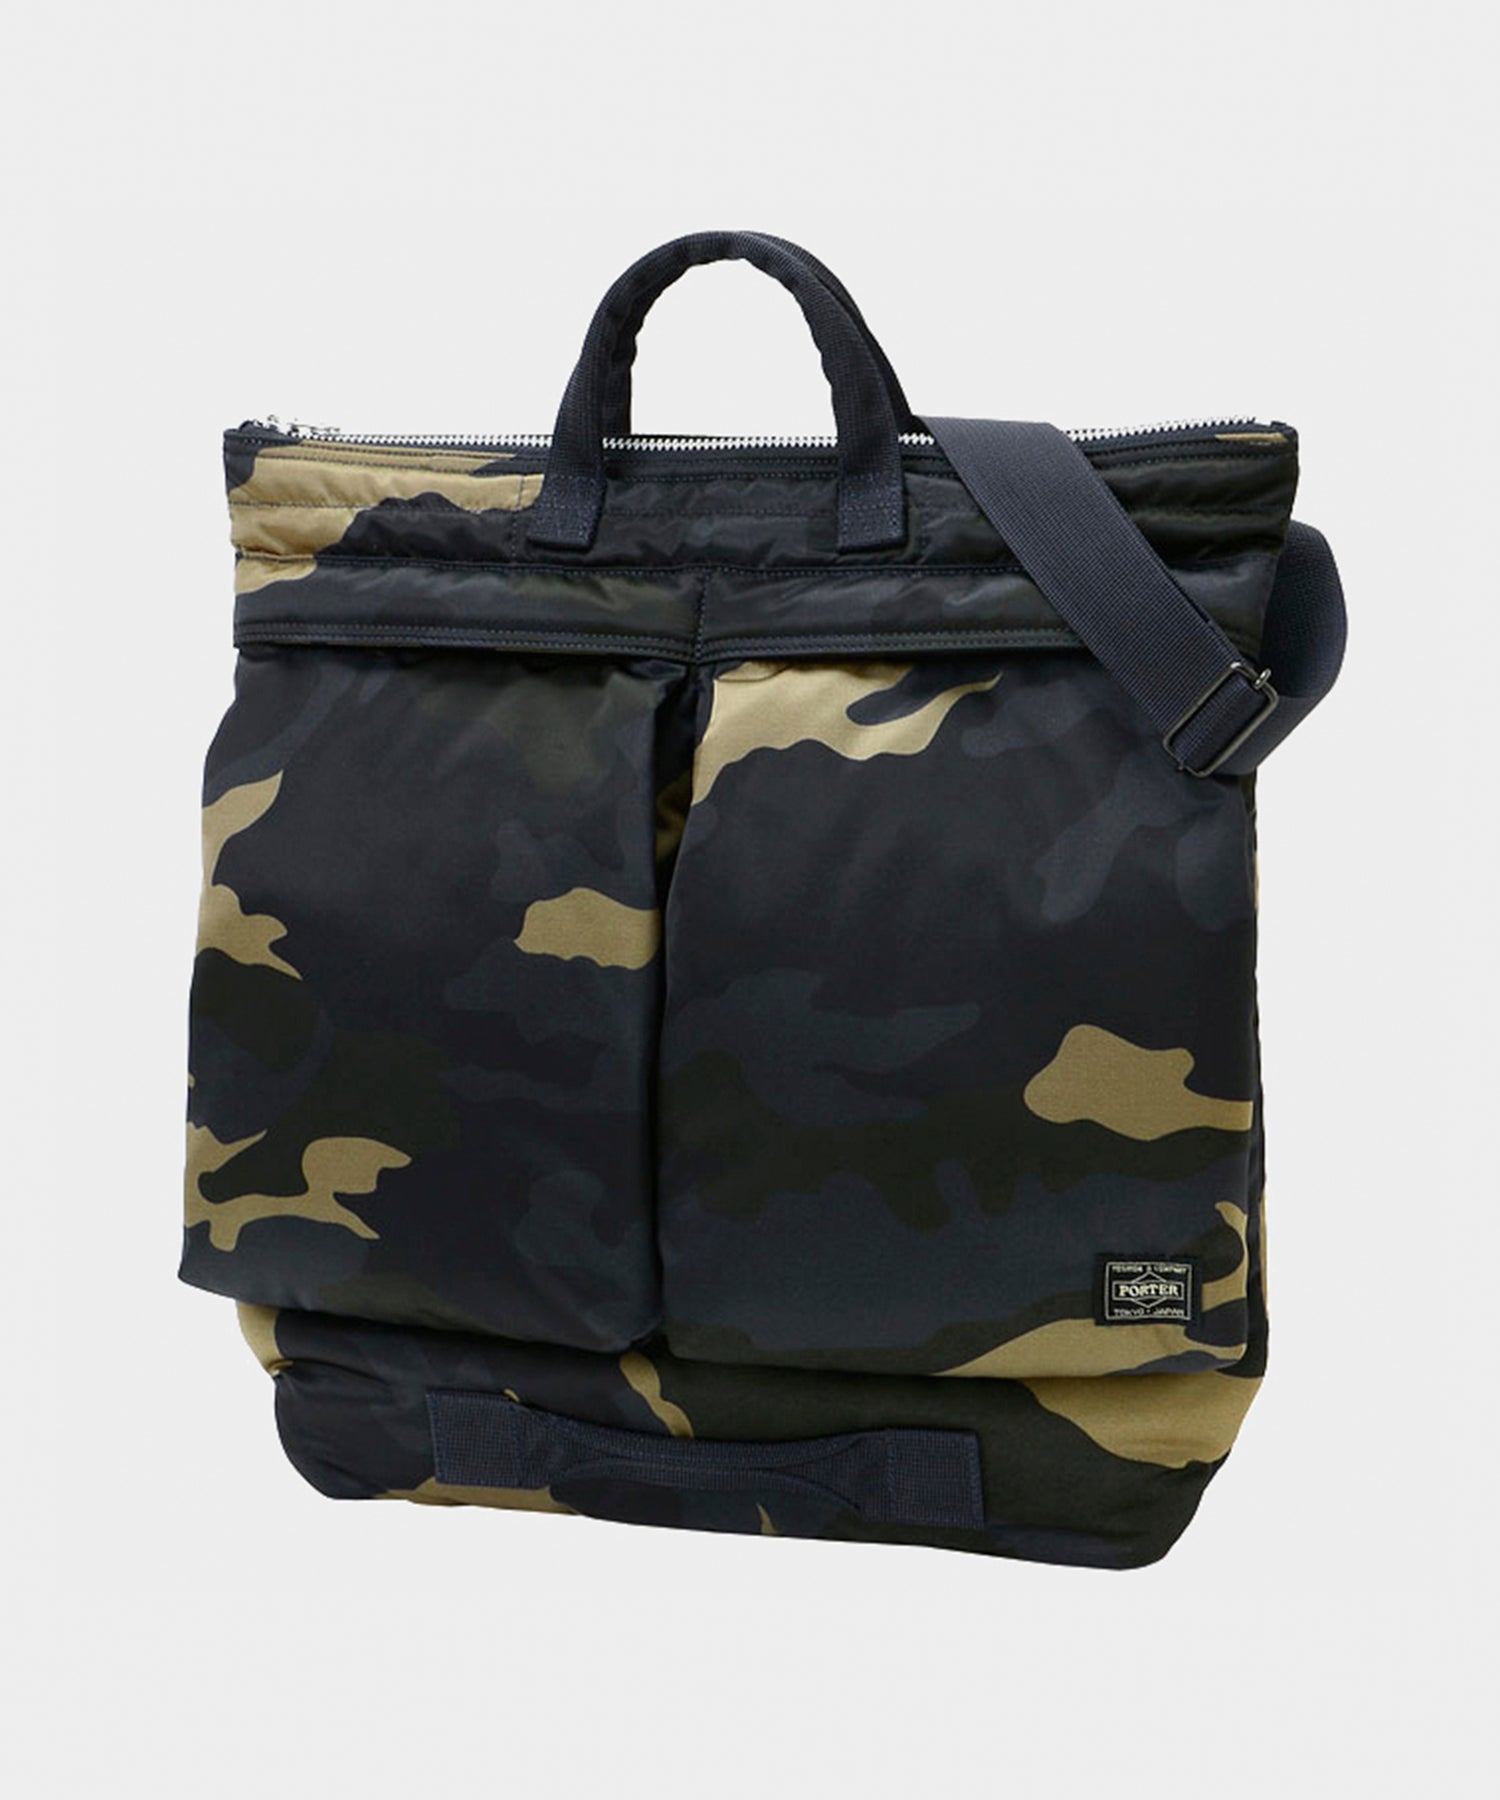 Porter Counter Shade Helmet Bag in Camouflage